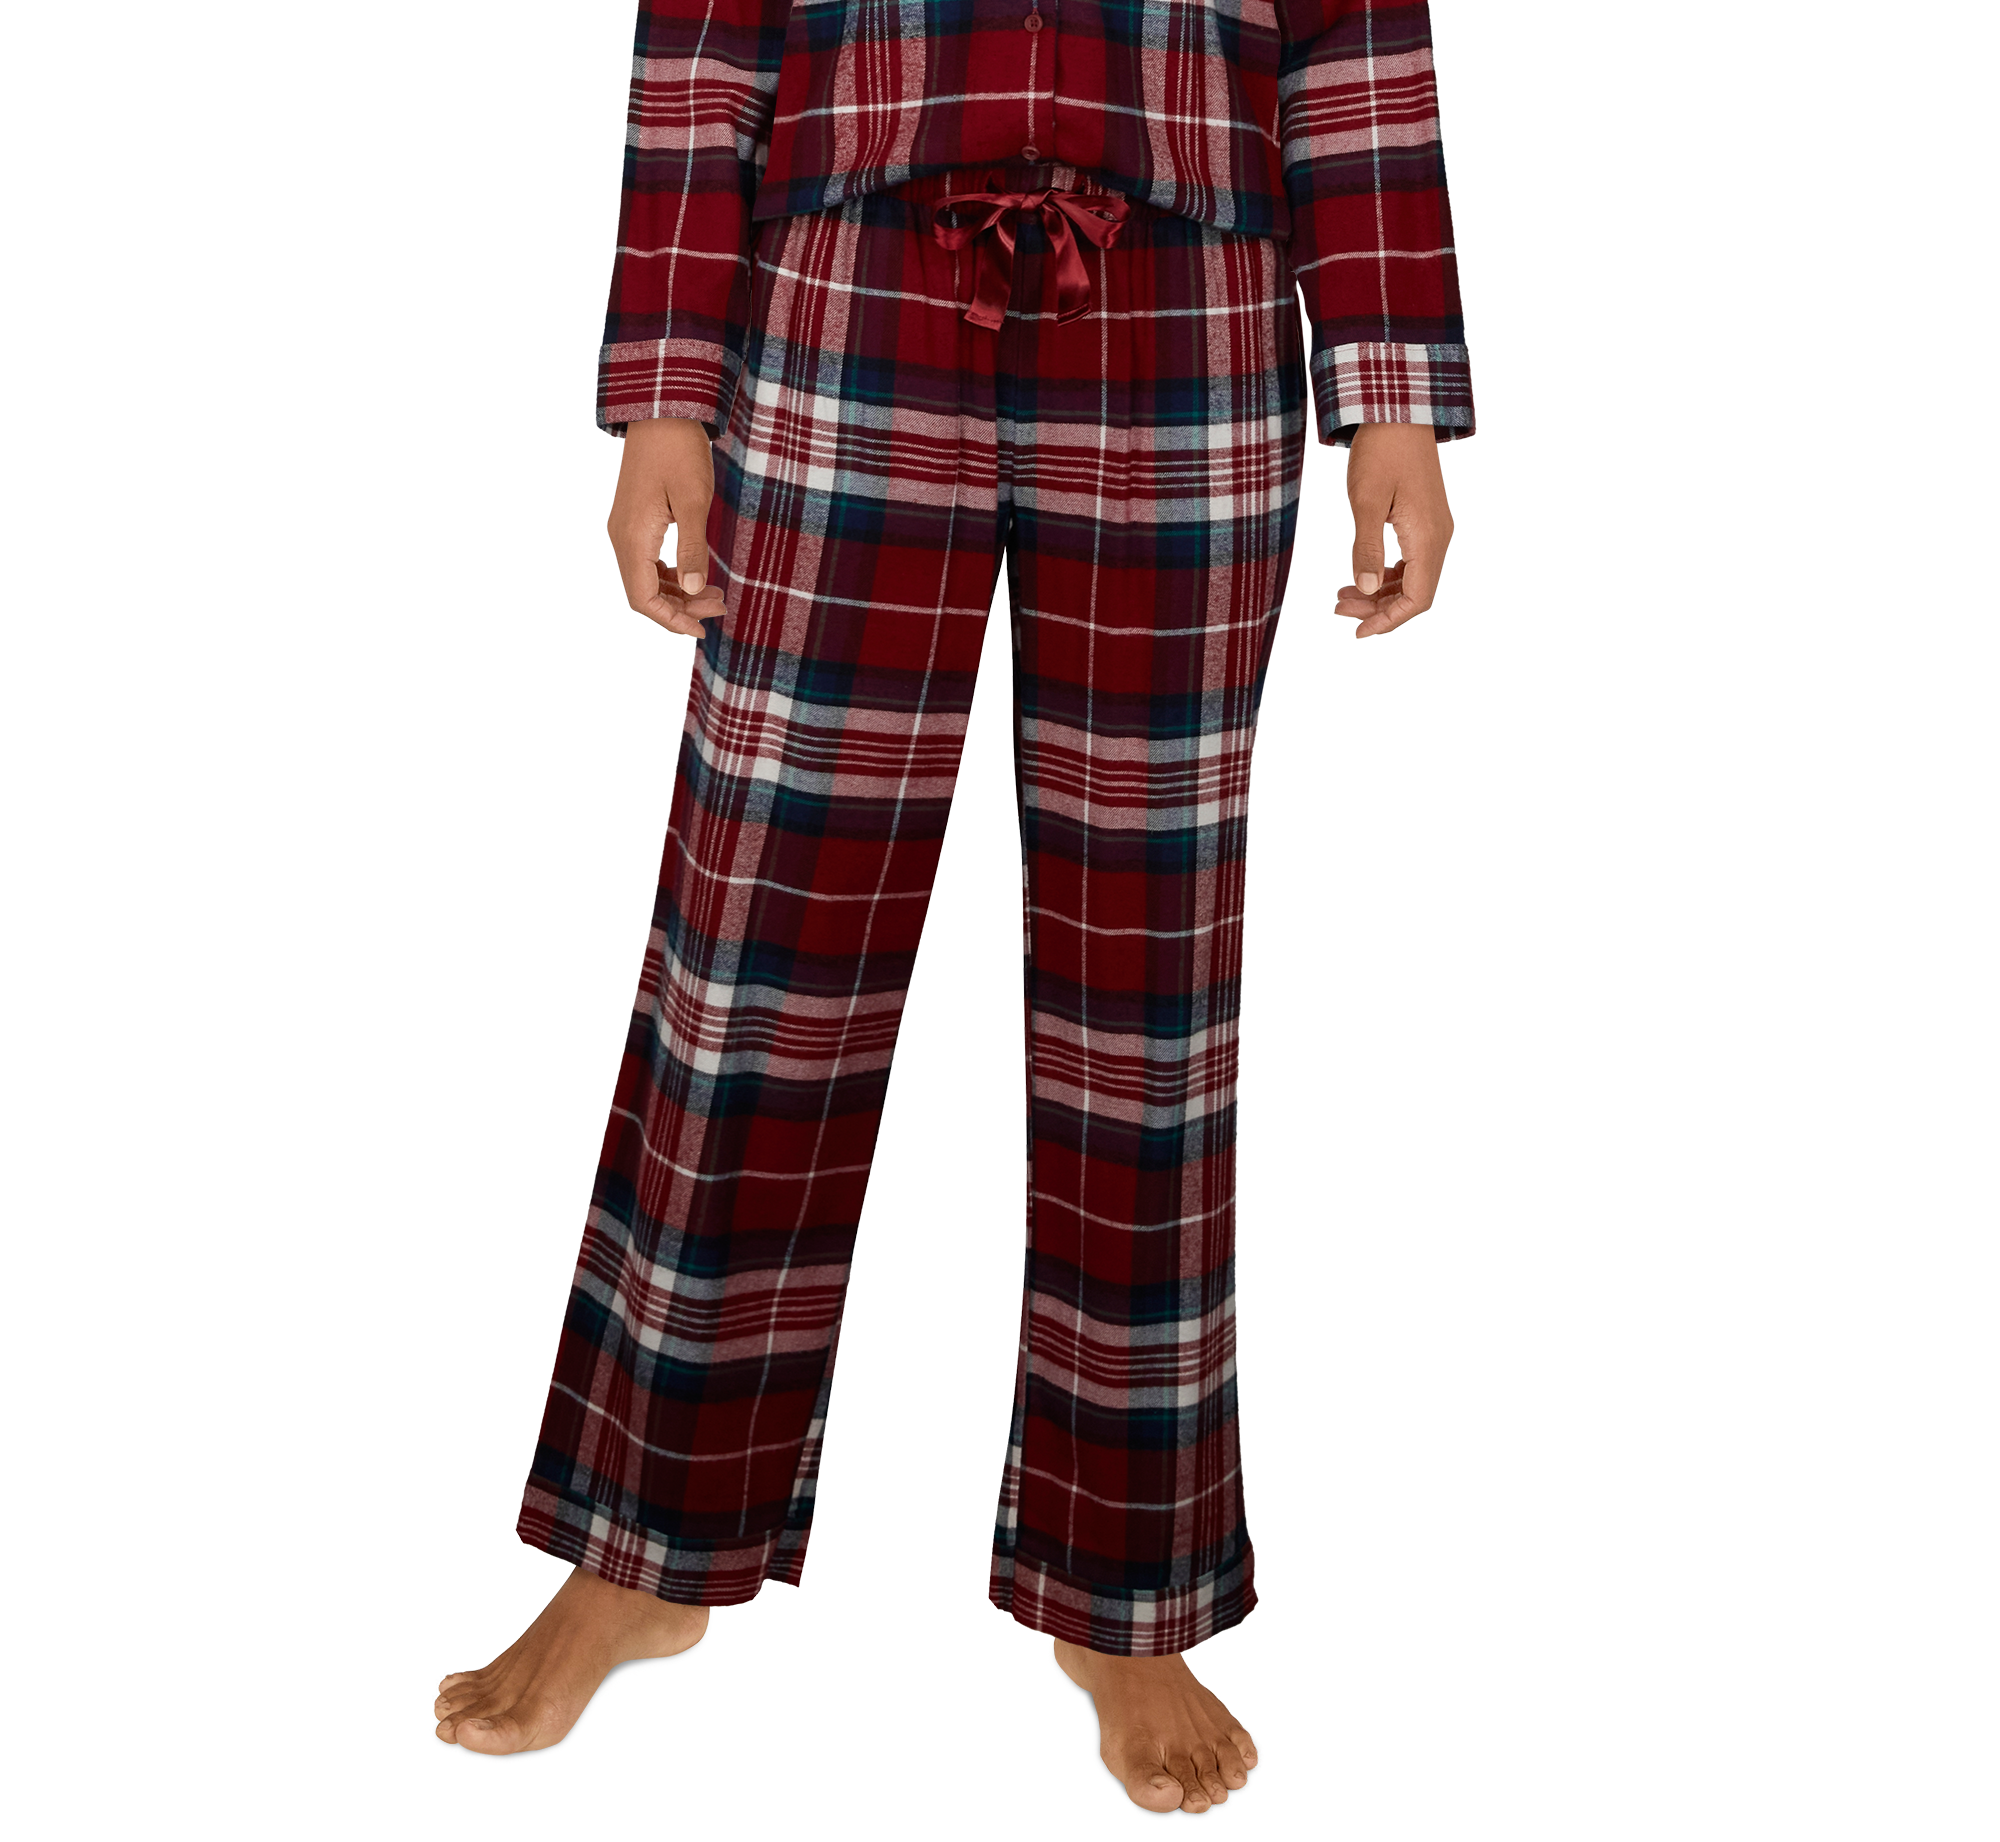 Natural Reflections Flannel Pajama Pants for Ladies